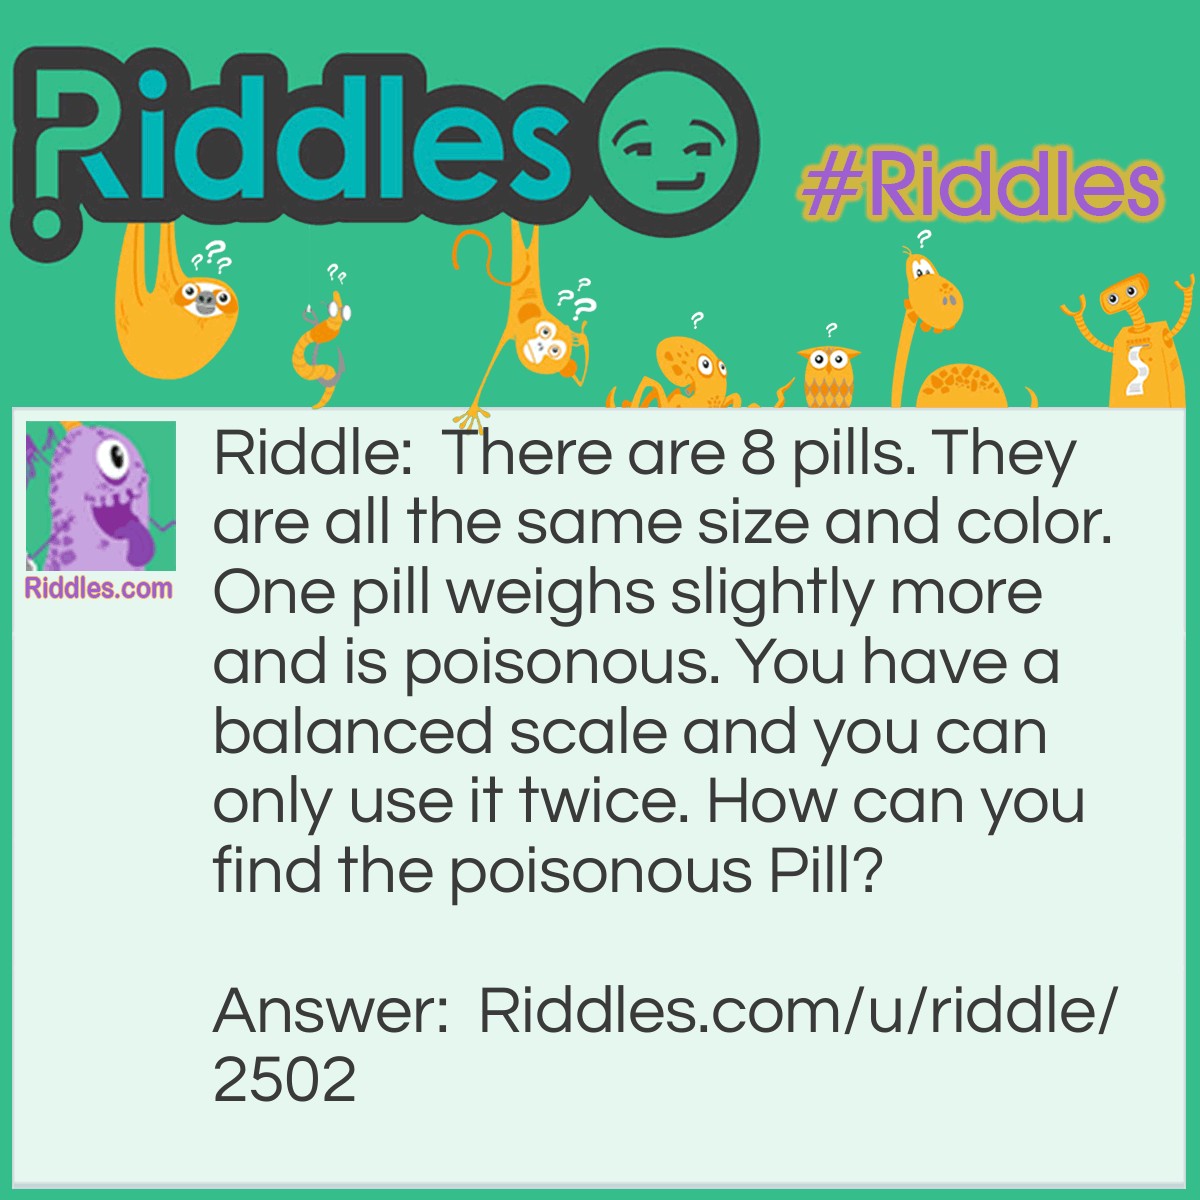 Riddle: There are 8 pills. They are all the same size and color. One pill weighs slightly more and is poisonous. You have a balanced scale and you can only use it twice. How can you find the poisonous Pill? Answer: Take any six pills and divide them into two groups of three each. Weigh putting the 3 pills on each side. If one side weigh's heavier than another, the heavier side consists of the poisonous pill. From the three pill in heavier side, weigh two pills. If one pill is heavier than another, the heavy one is poisonous pill. If both pill weigh same, the remaining third pill is poisonous. If all the 6 pill weigh the same, weigh the remaining two pill and heavy one is poisonous.